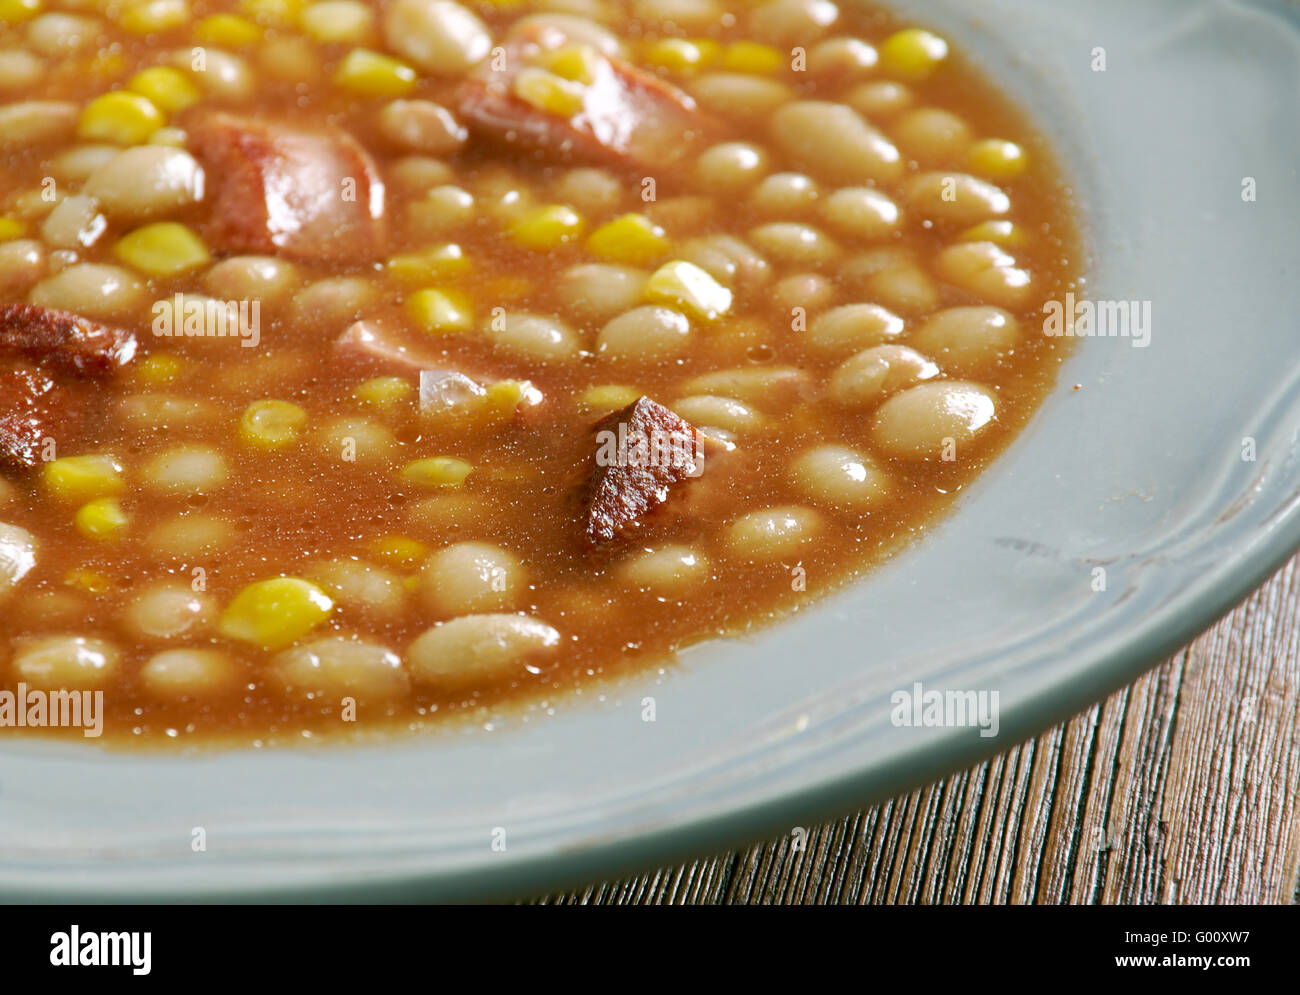 Tihove - Stew of corn beans and peanut butter.African cuisine